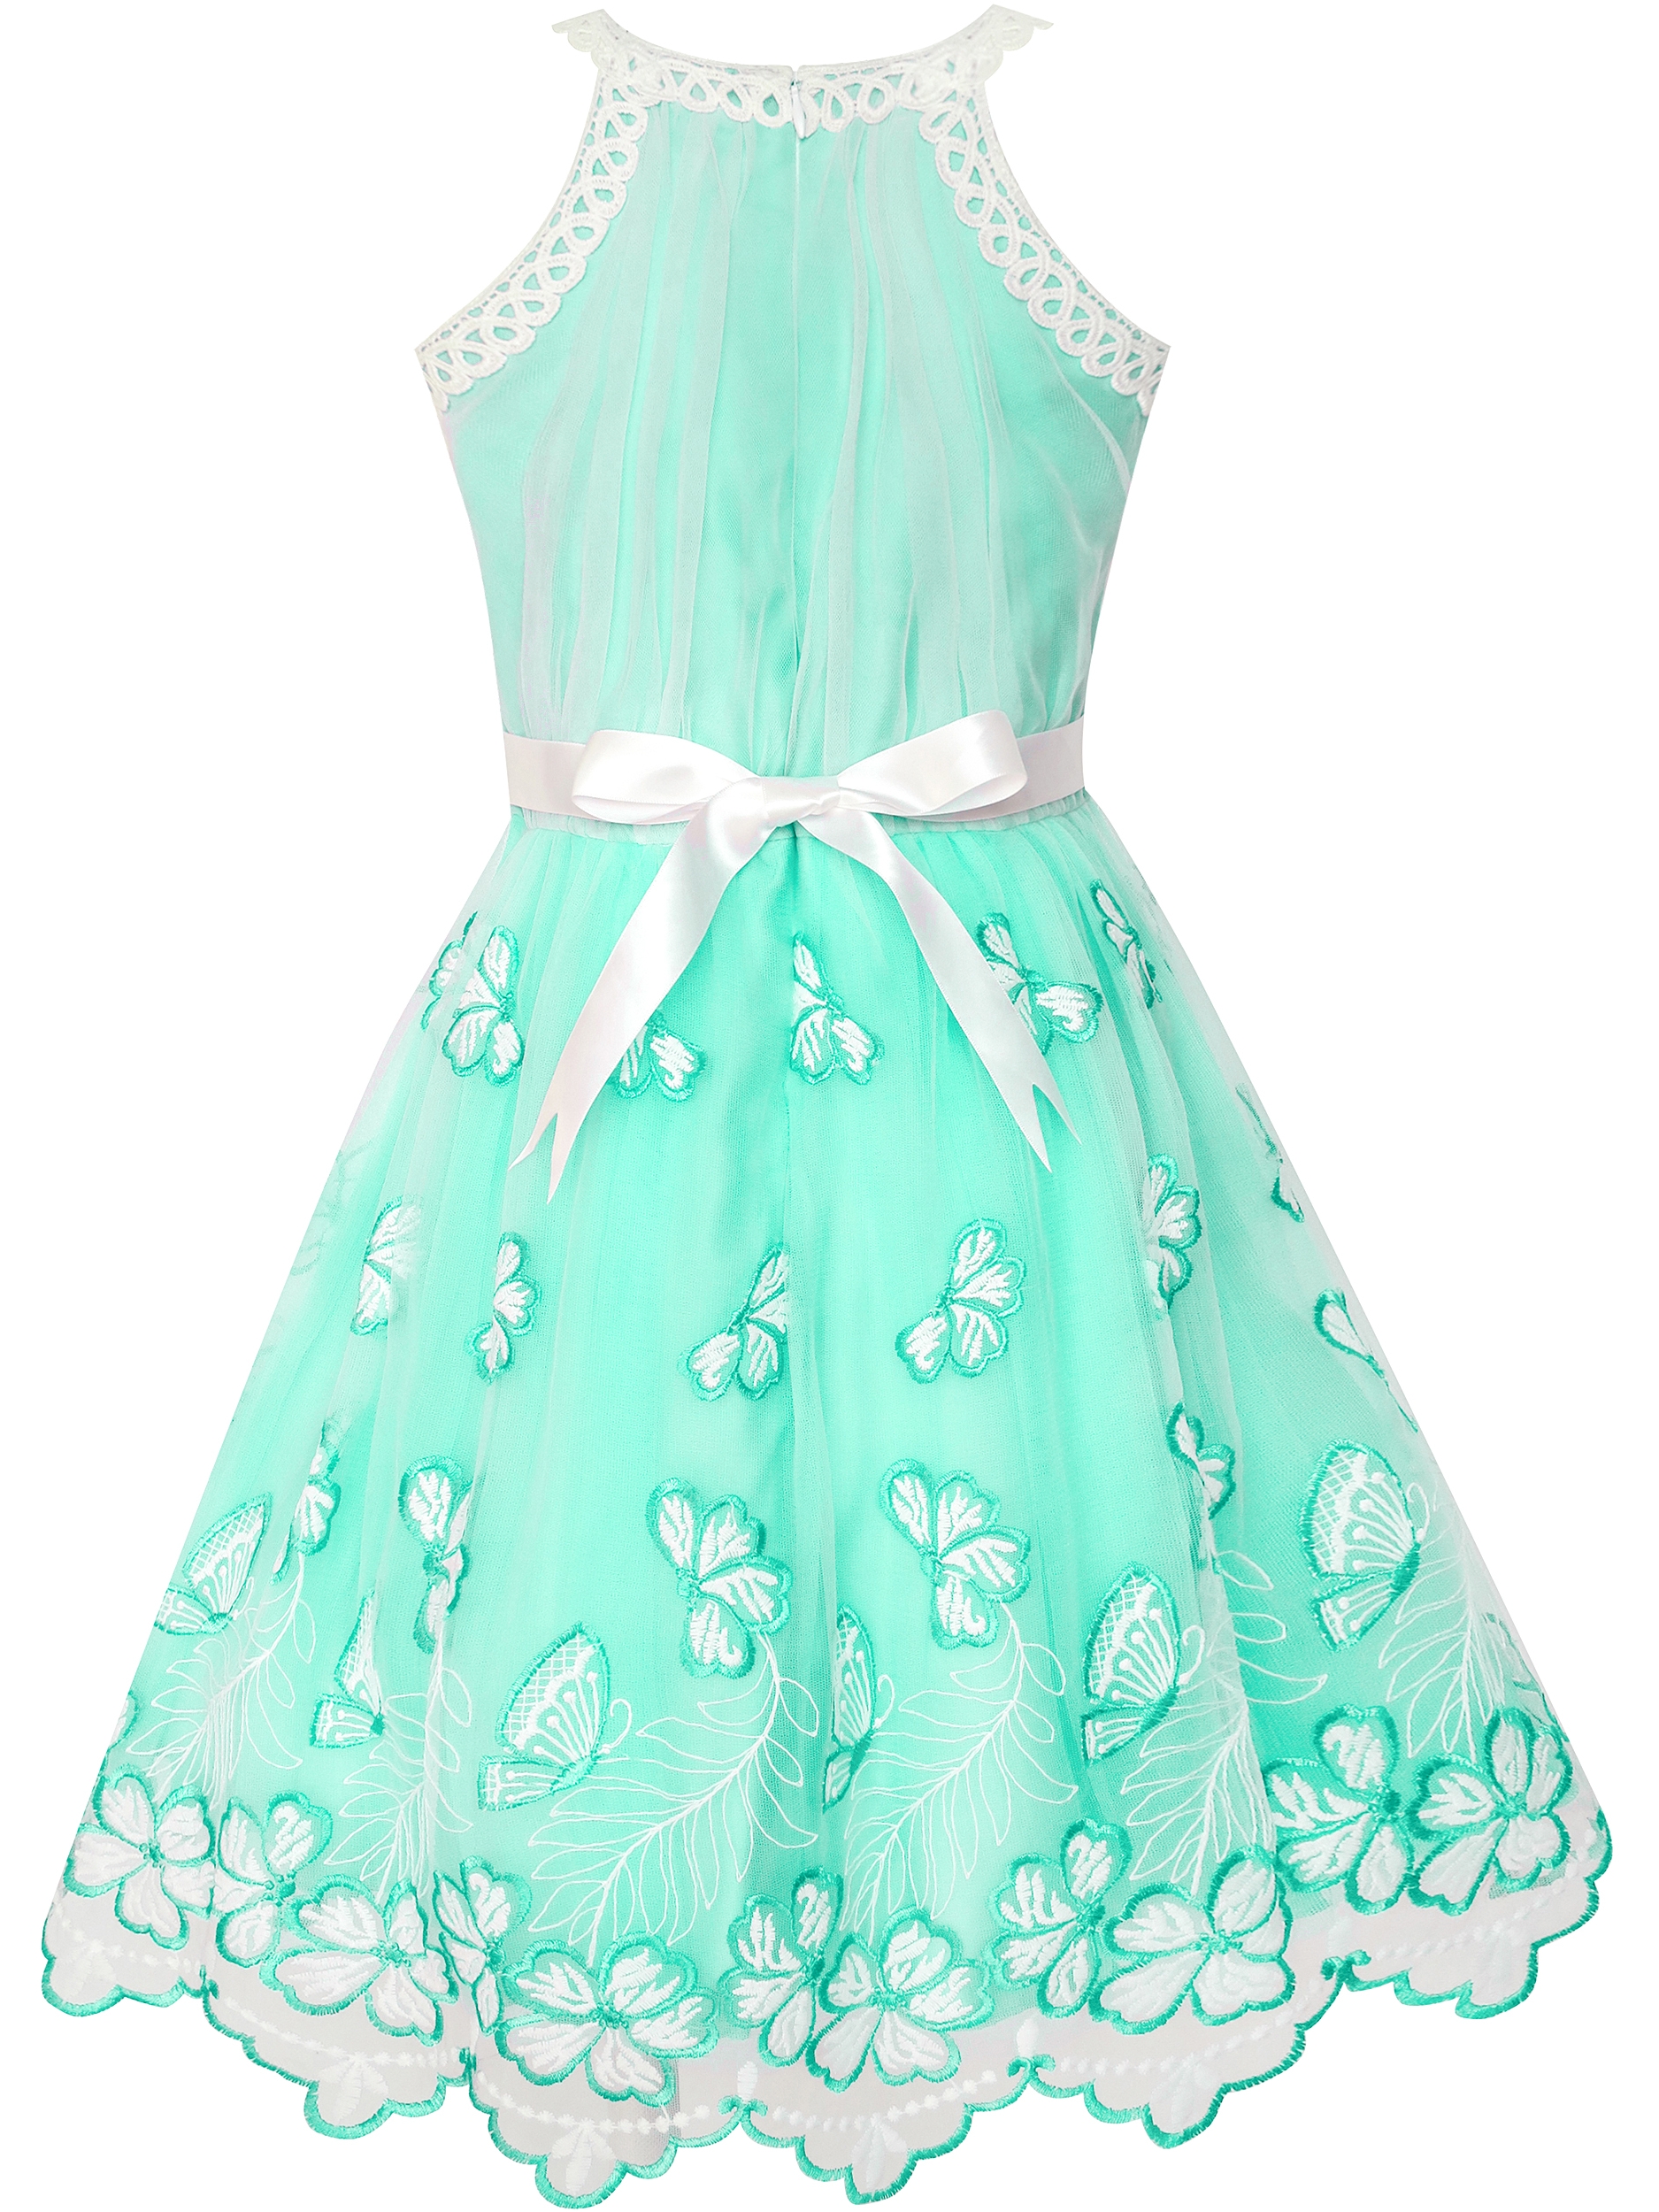 Girls Dress Turquoise Butterfly Embroidered Halter Dress Party 5 - image 3 of 7